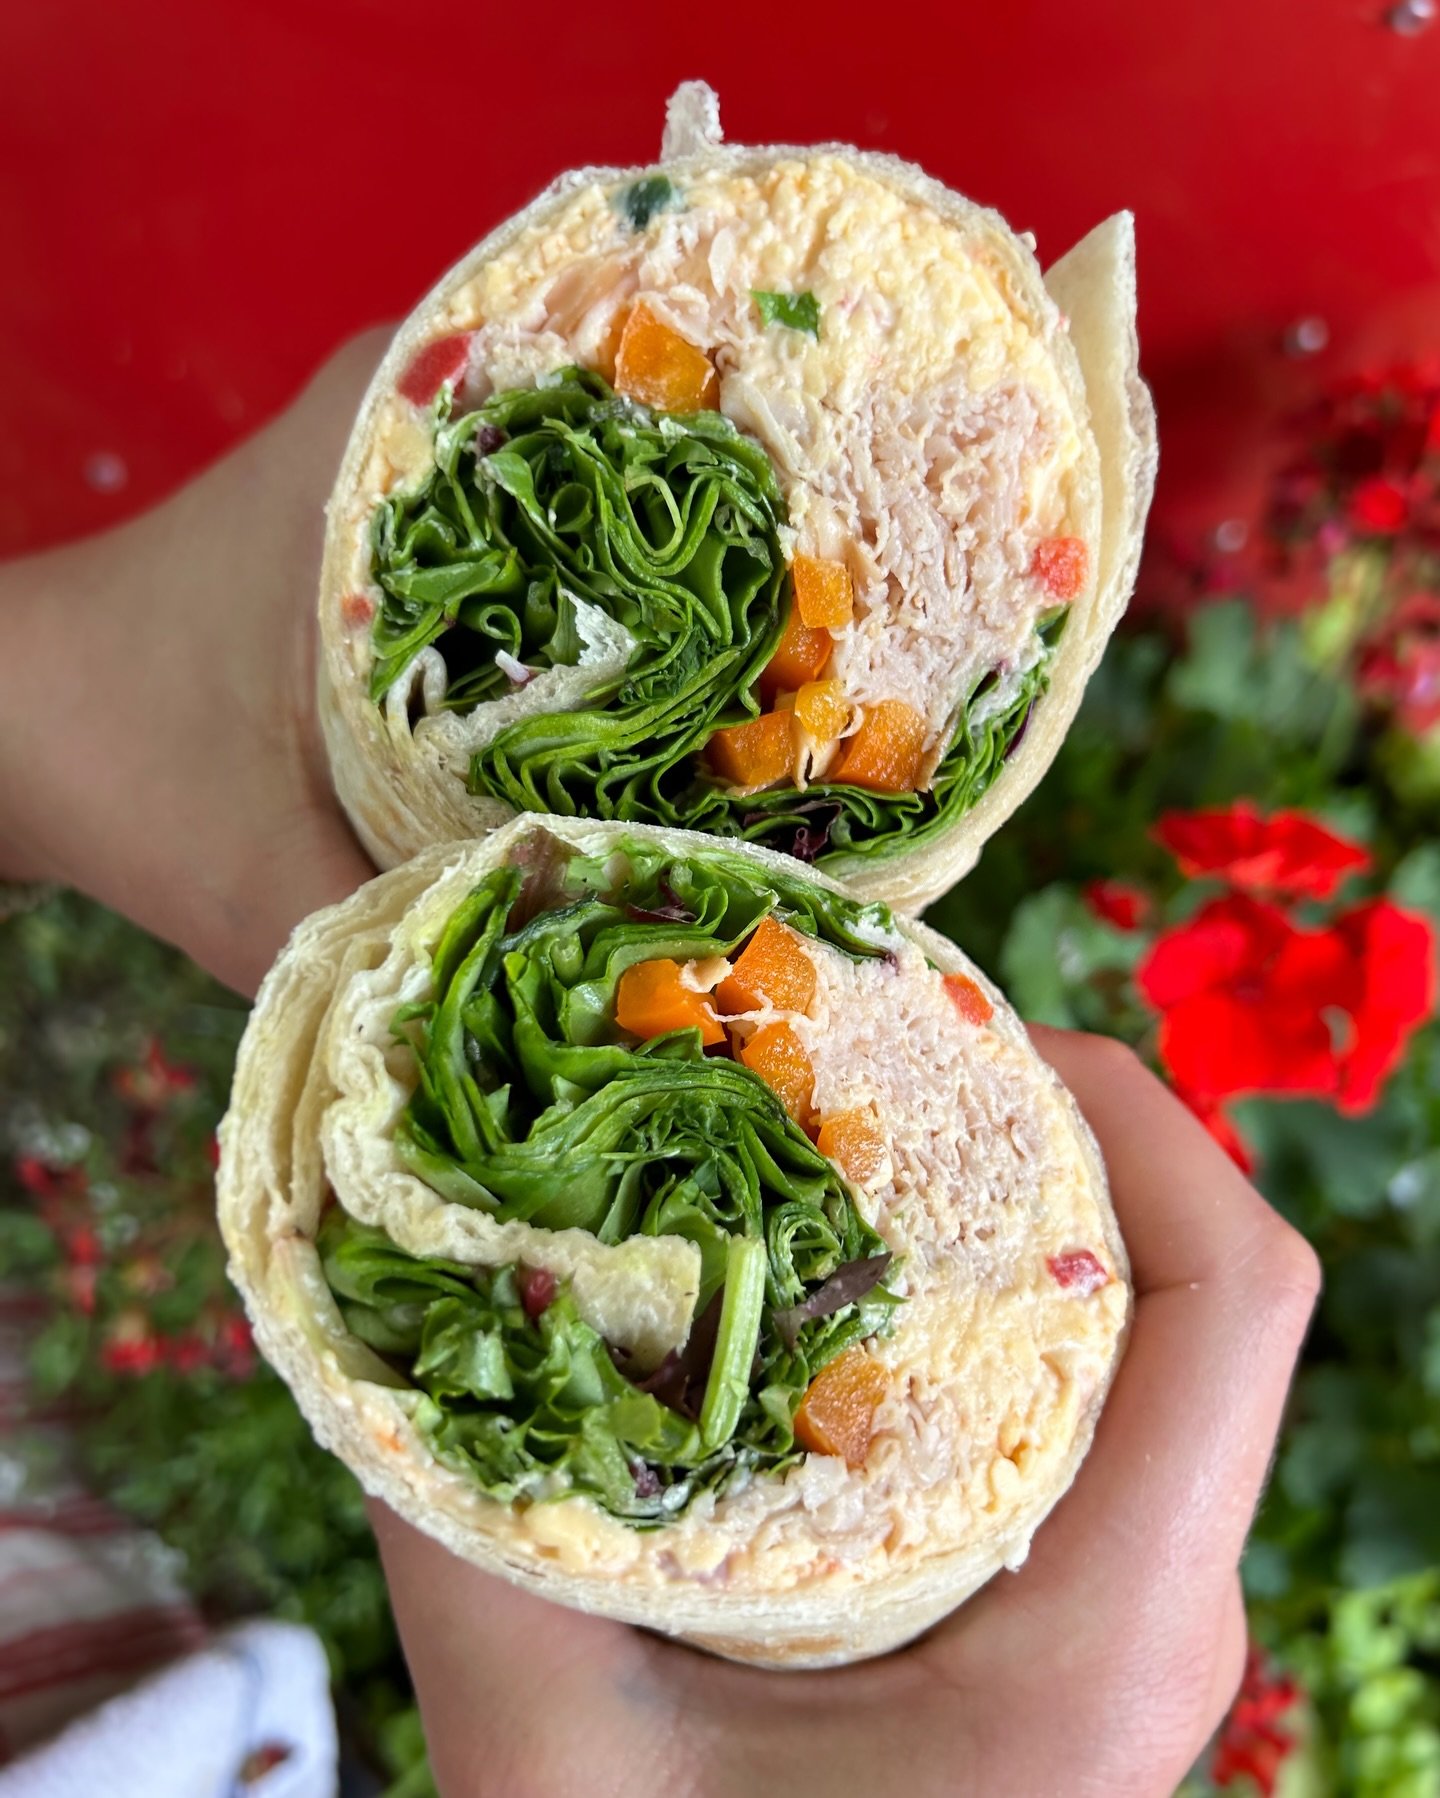 🥬 🍗 🧀 Pimento + Smoked Turkey Wrap 🥬 🍗 🧀 

The perfect lunch for a day on the river!